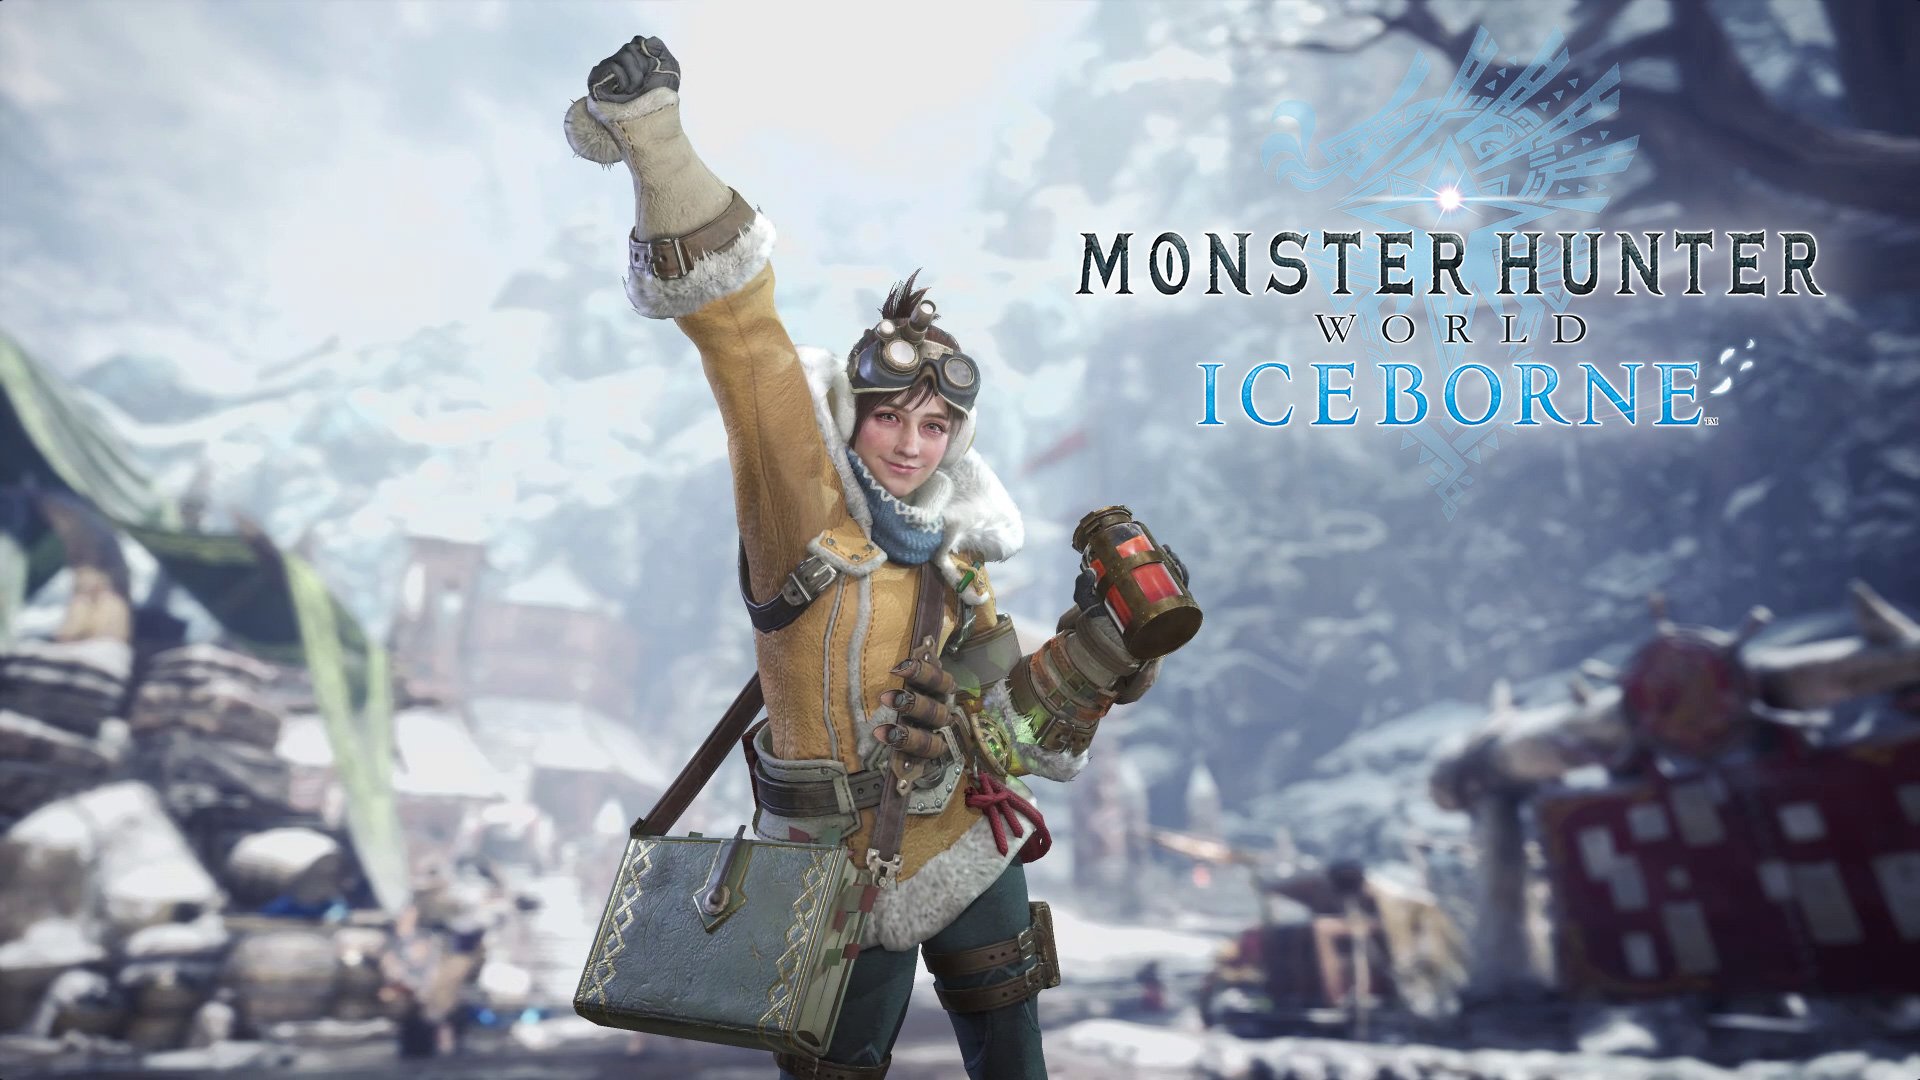 Monster Hunter World Iceborne Tips And Tricks For The Story Crafting Armor Spheres Clutch Claw And More The Mako Reactor